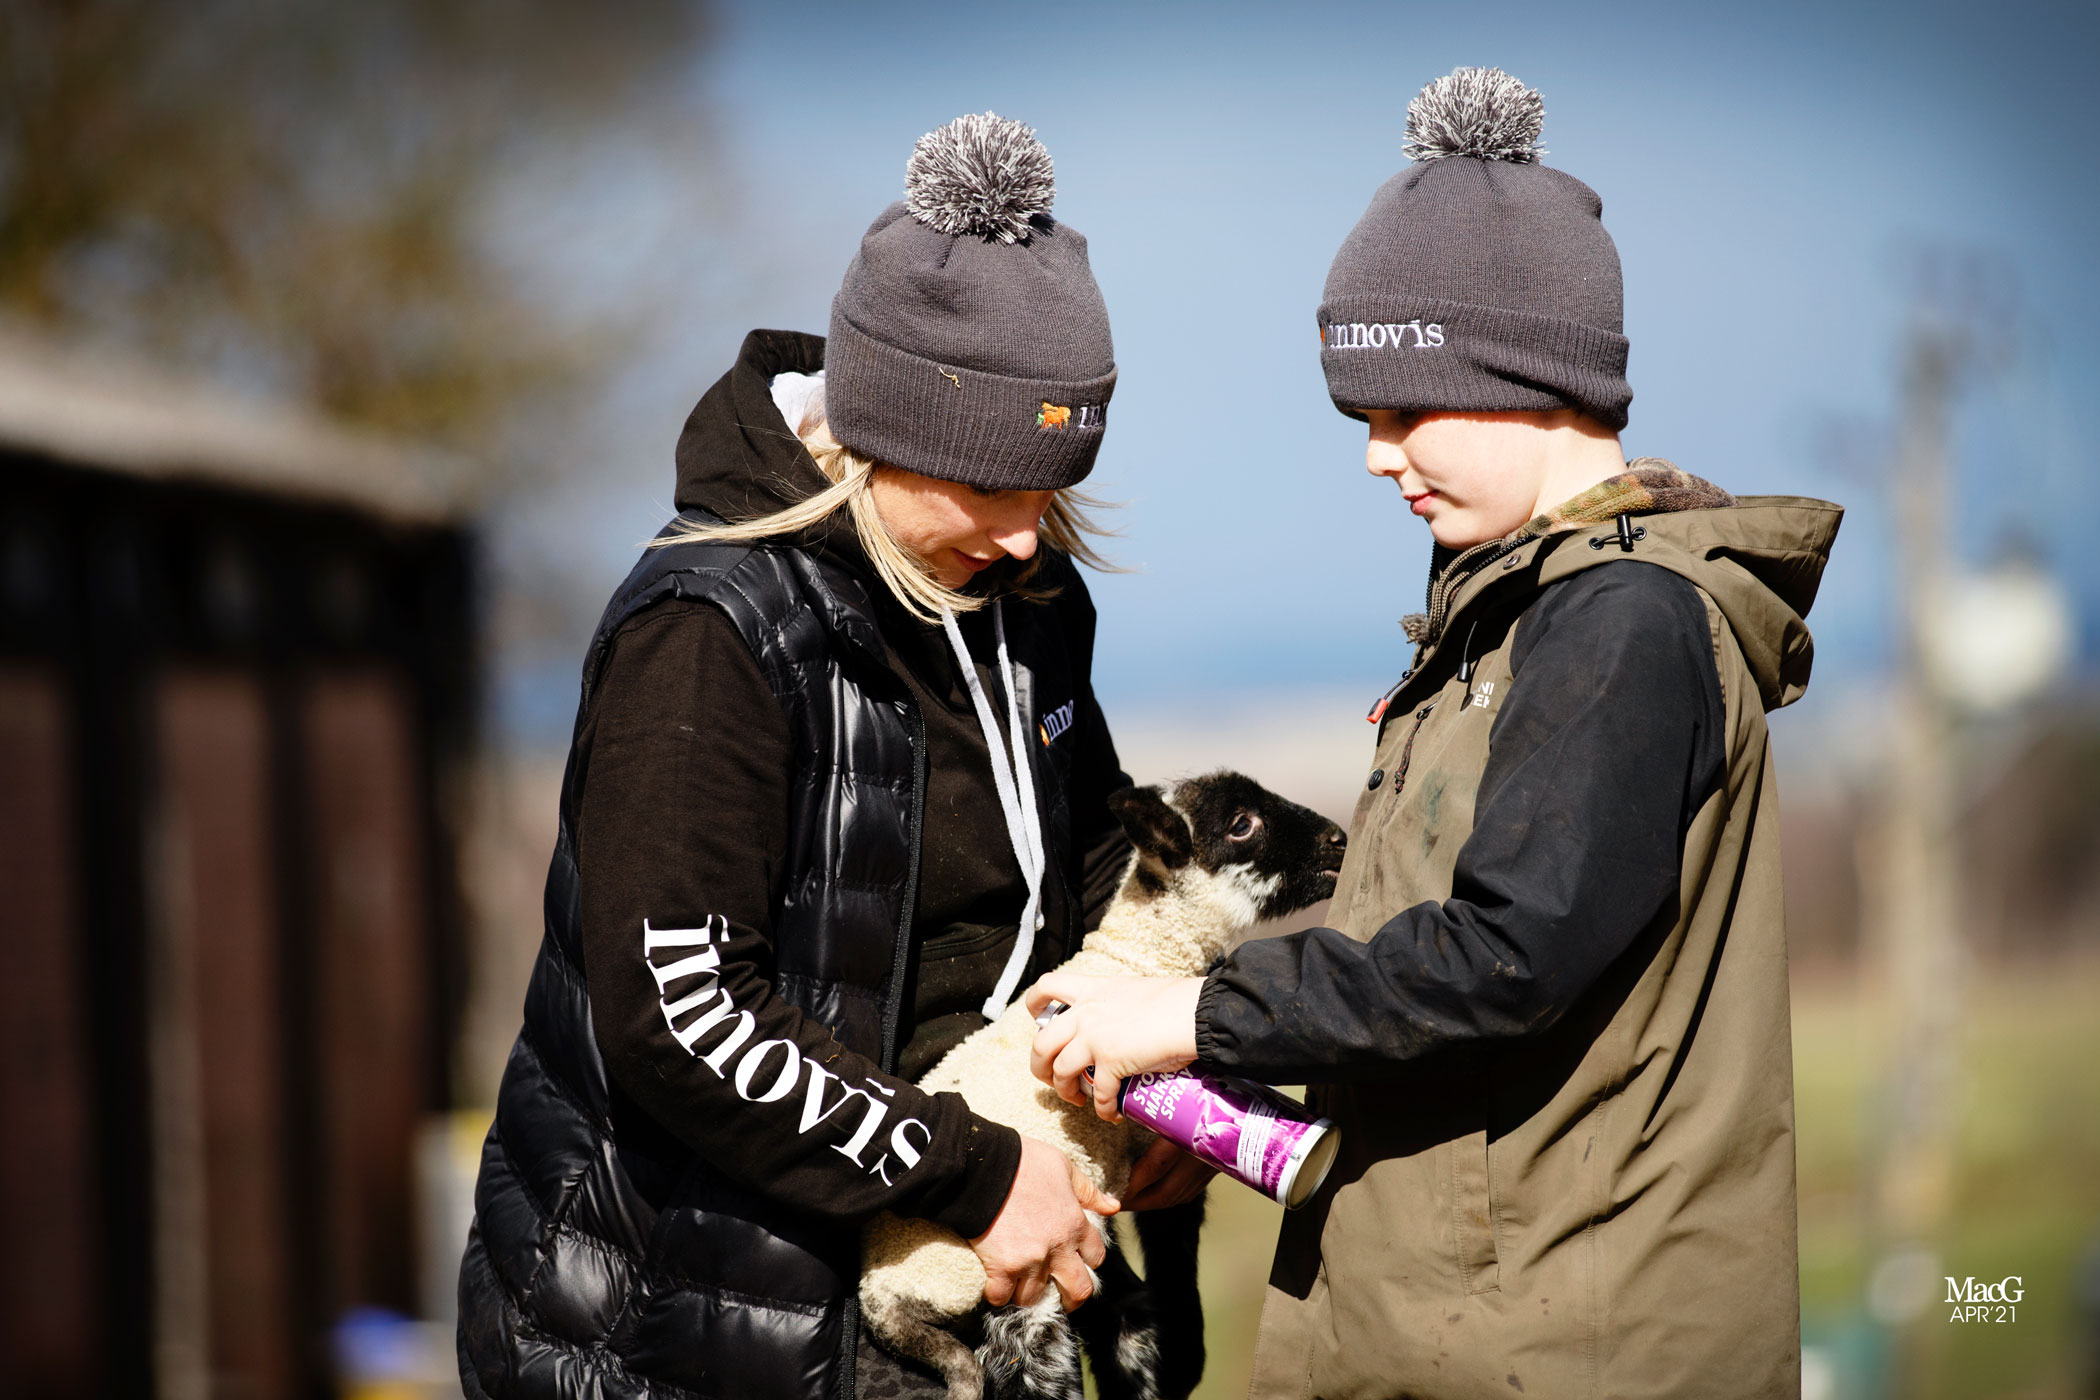 To farmers rearing and breeding livestock while wearing Innovis bobble hats